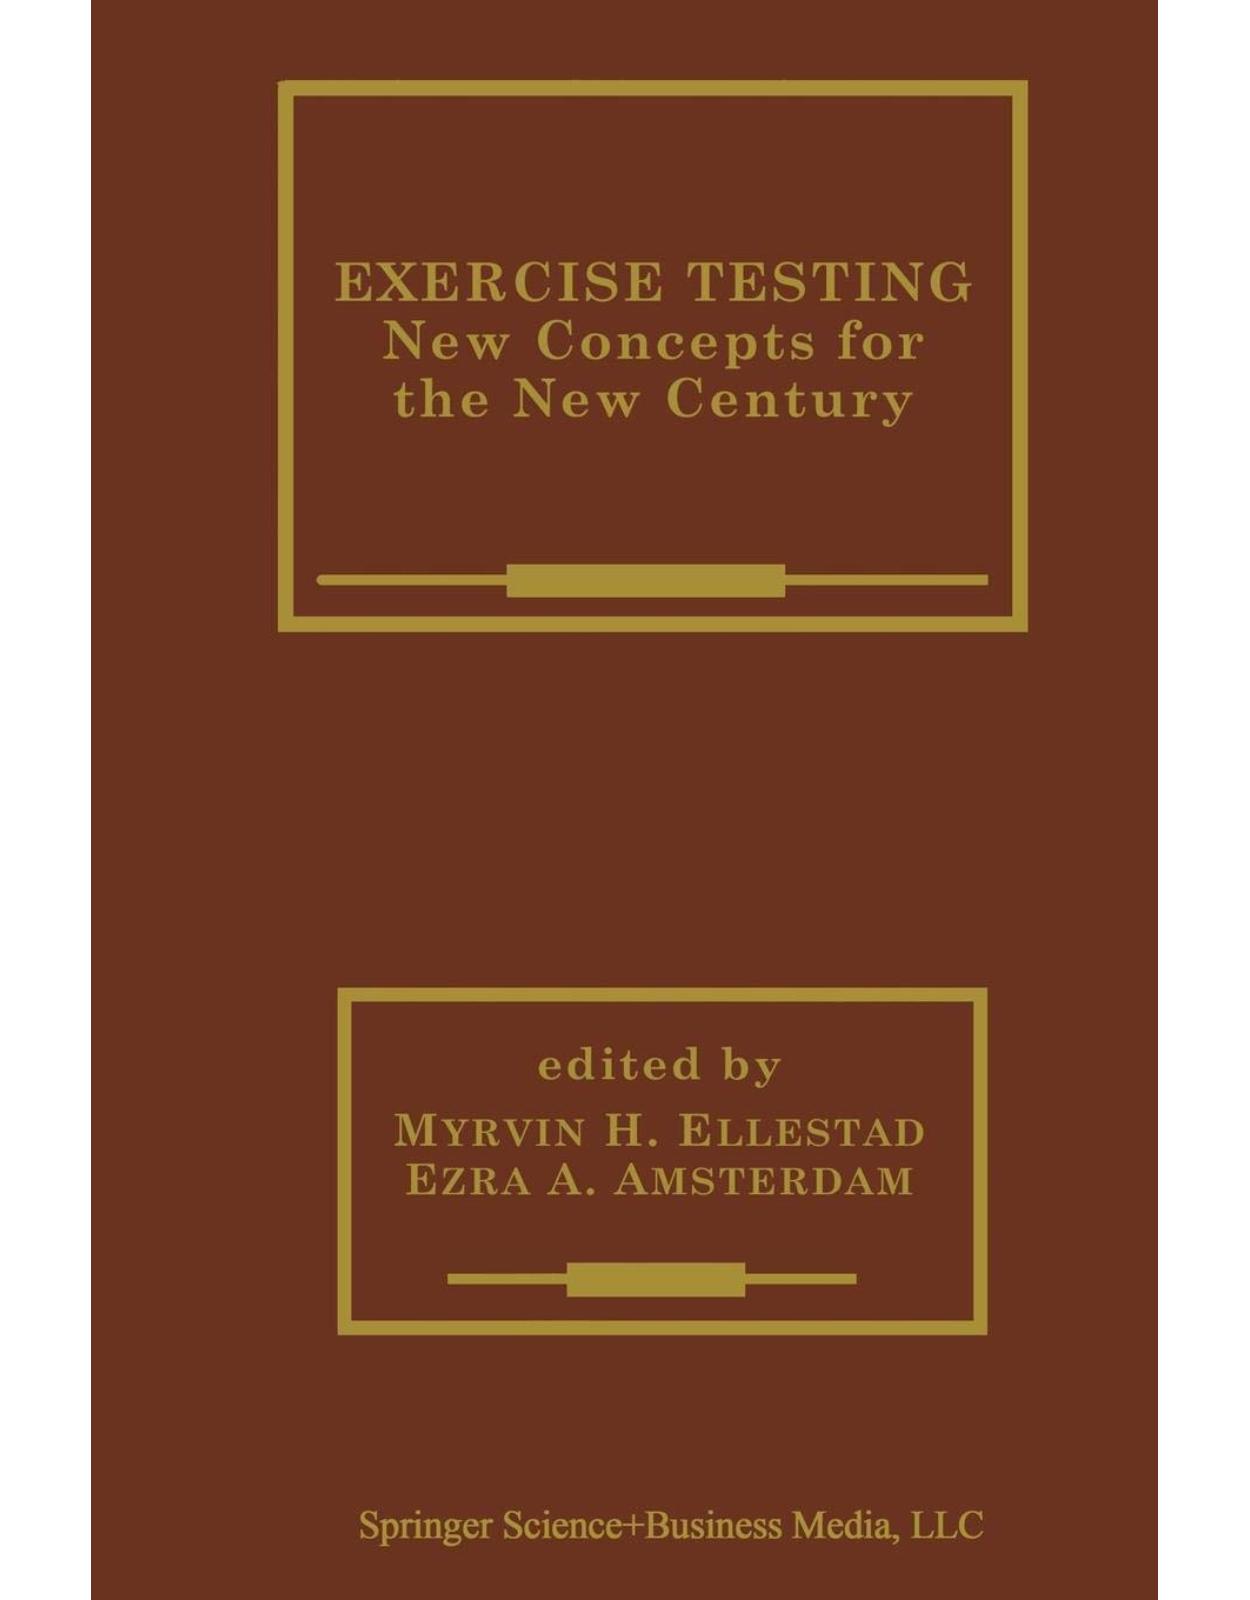 Exercise Testing.New Concepts for the New Century